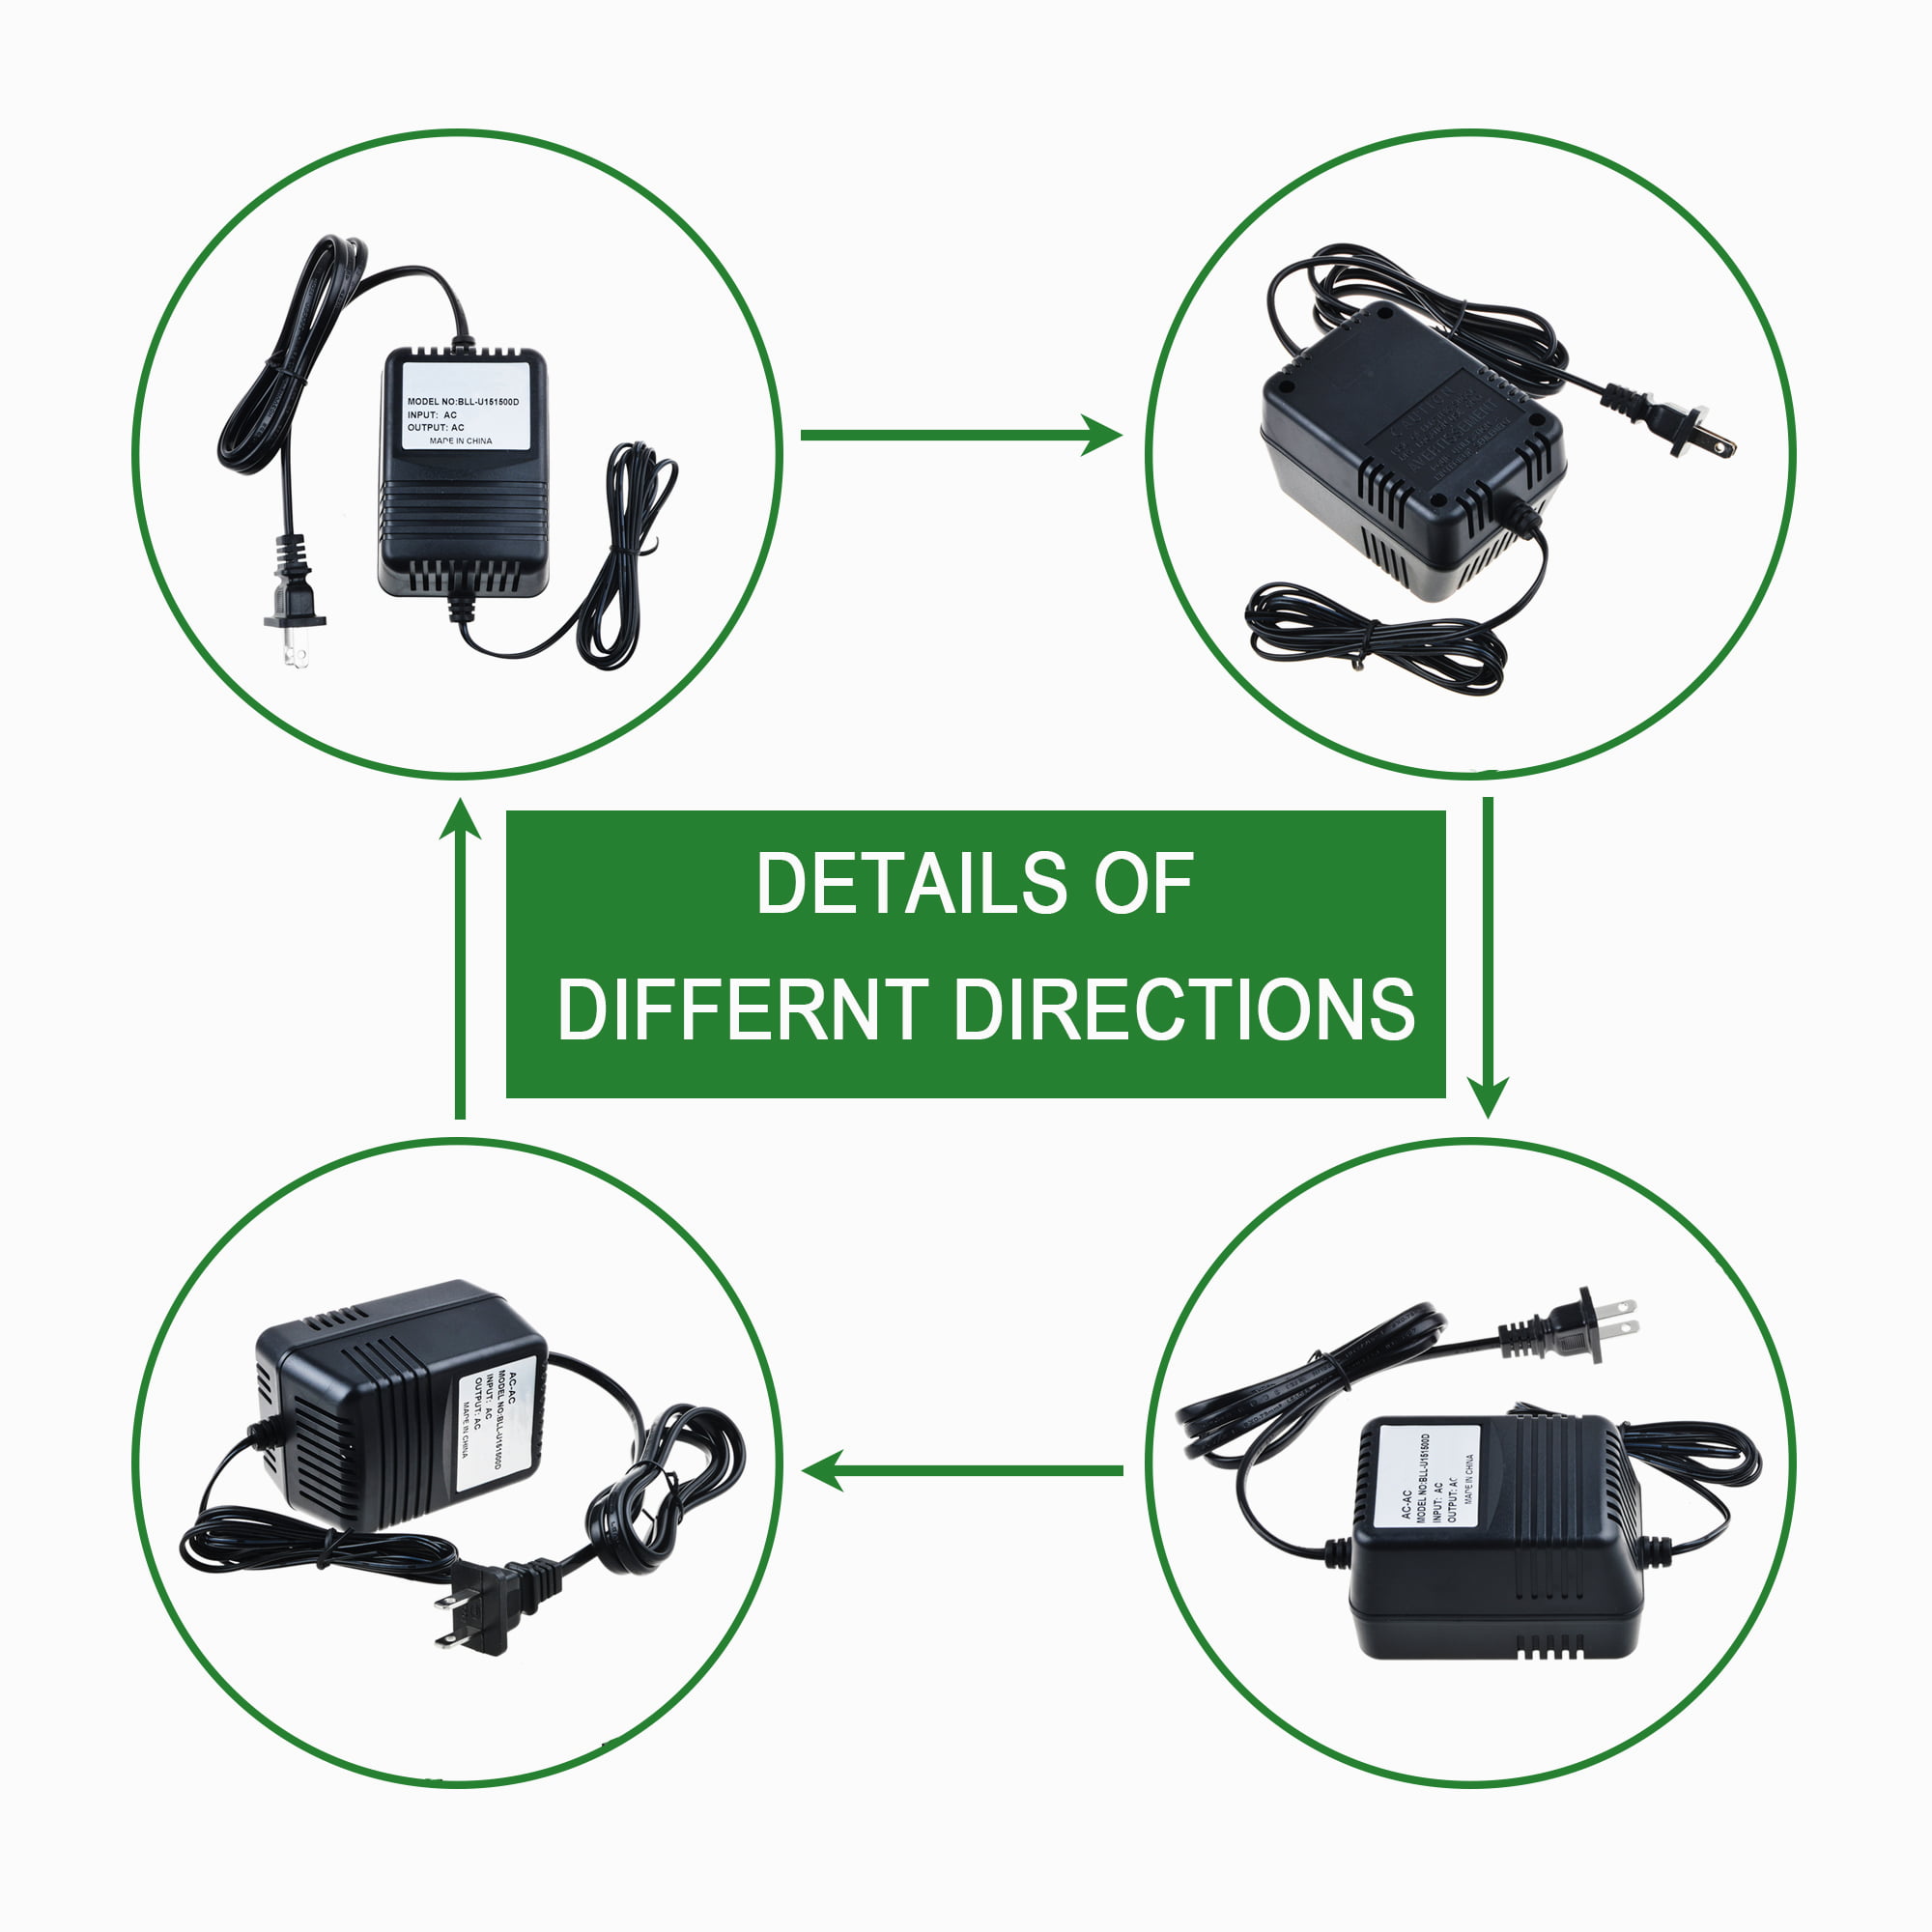  SupplySource AC-AC Adapter Replacement for Black & Decker  GCO1200 GC01200 12V 3/8 Cordless Drill Driver : Tools & Home Improvement